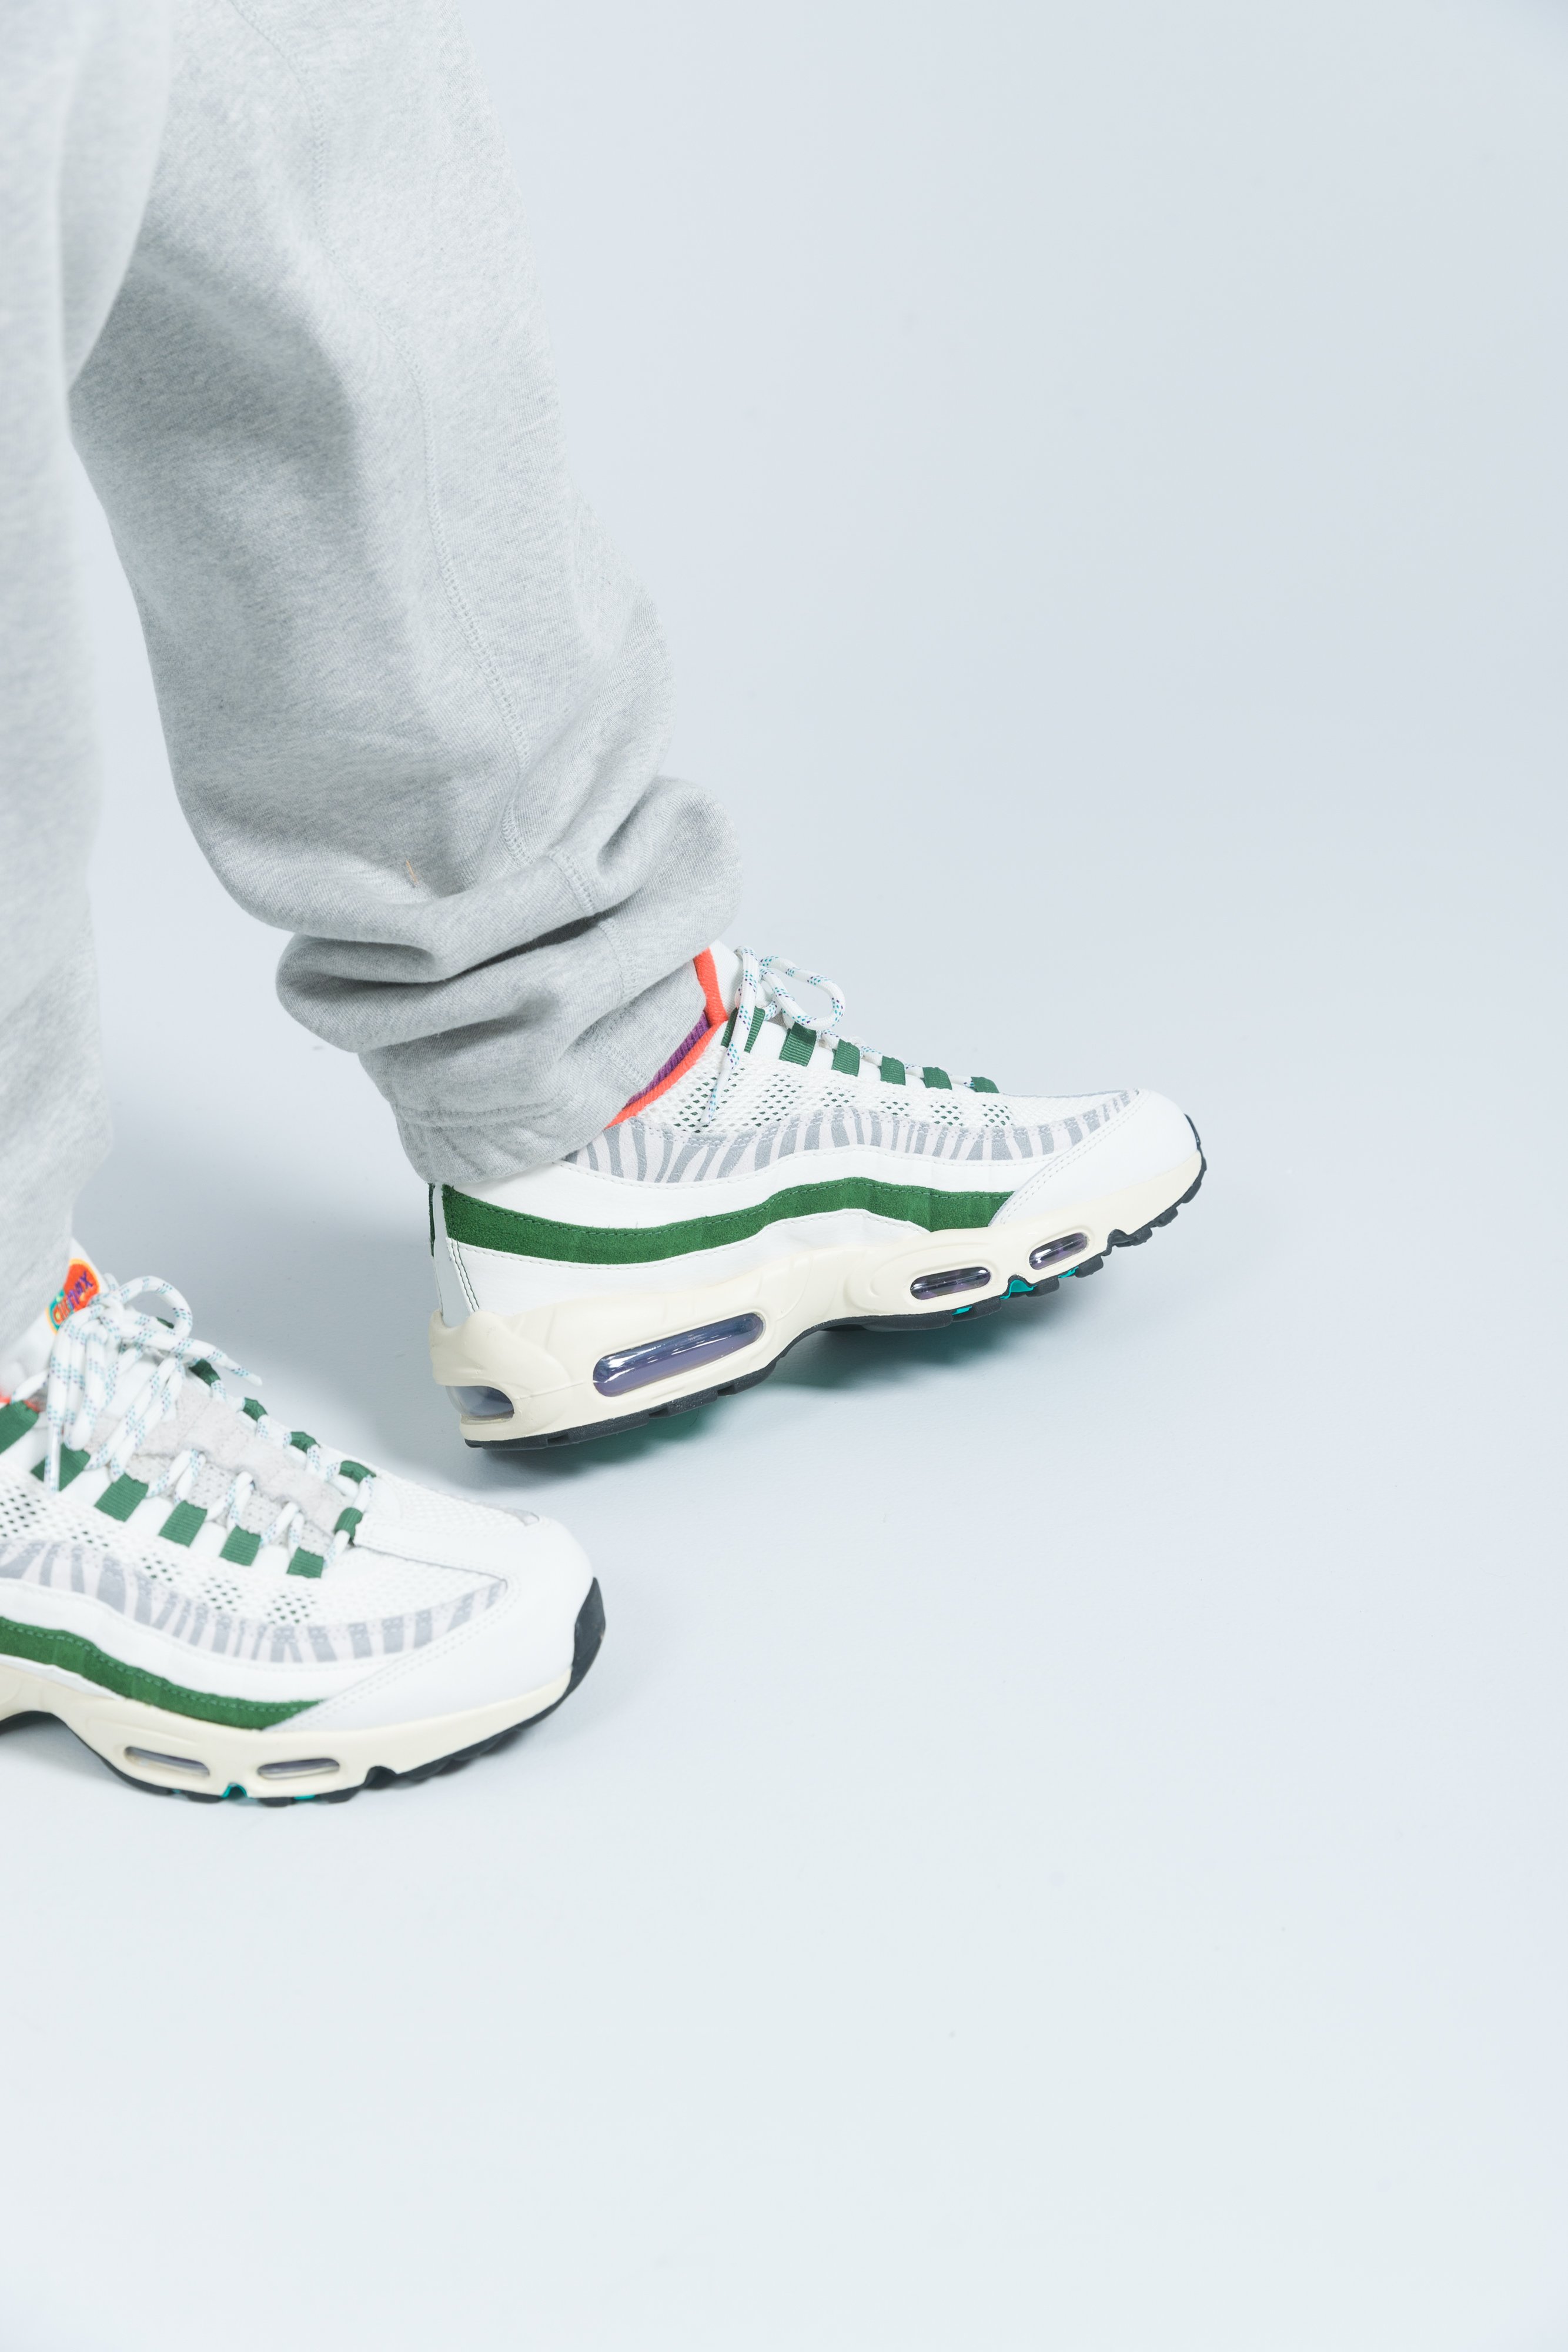 air max 95 forest green